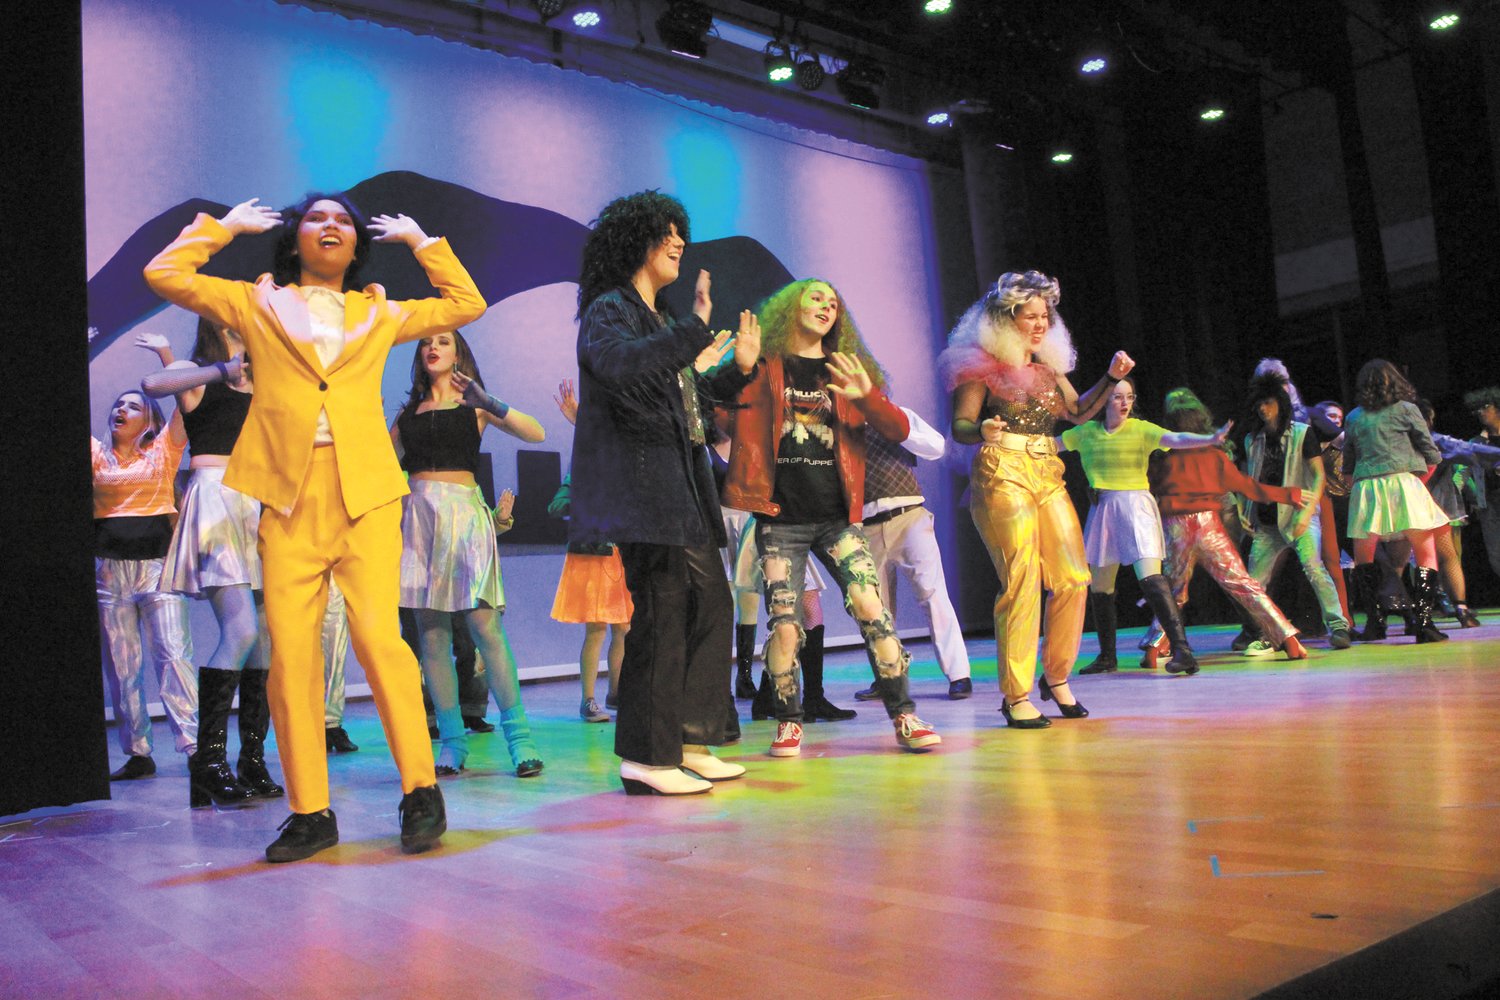 HERE WE GO AGAIN: The Pilgrim Players take on the hit Broadway musical Rock of Ages. Peformances will be held Nov 18 and 19 at 7 p.m. and Nov 20 at 2 p.m.